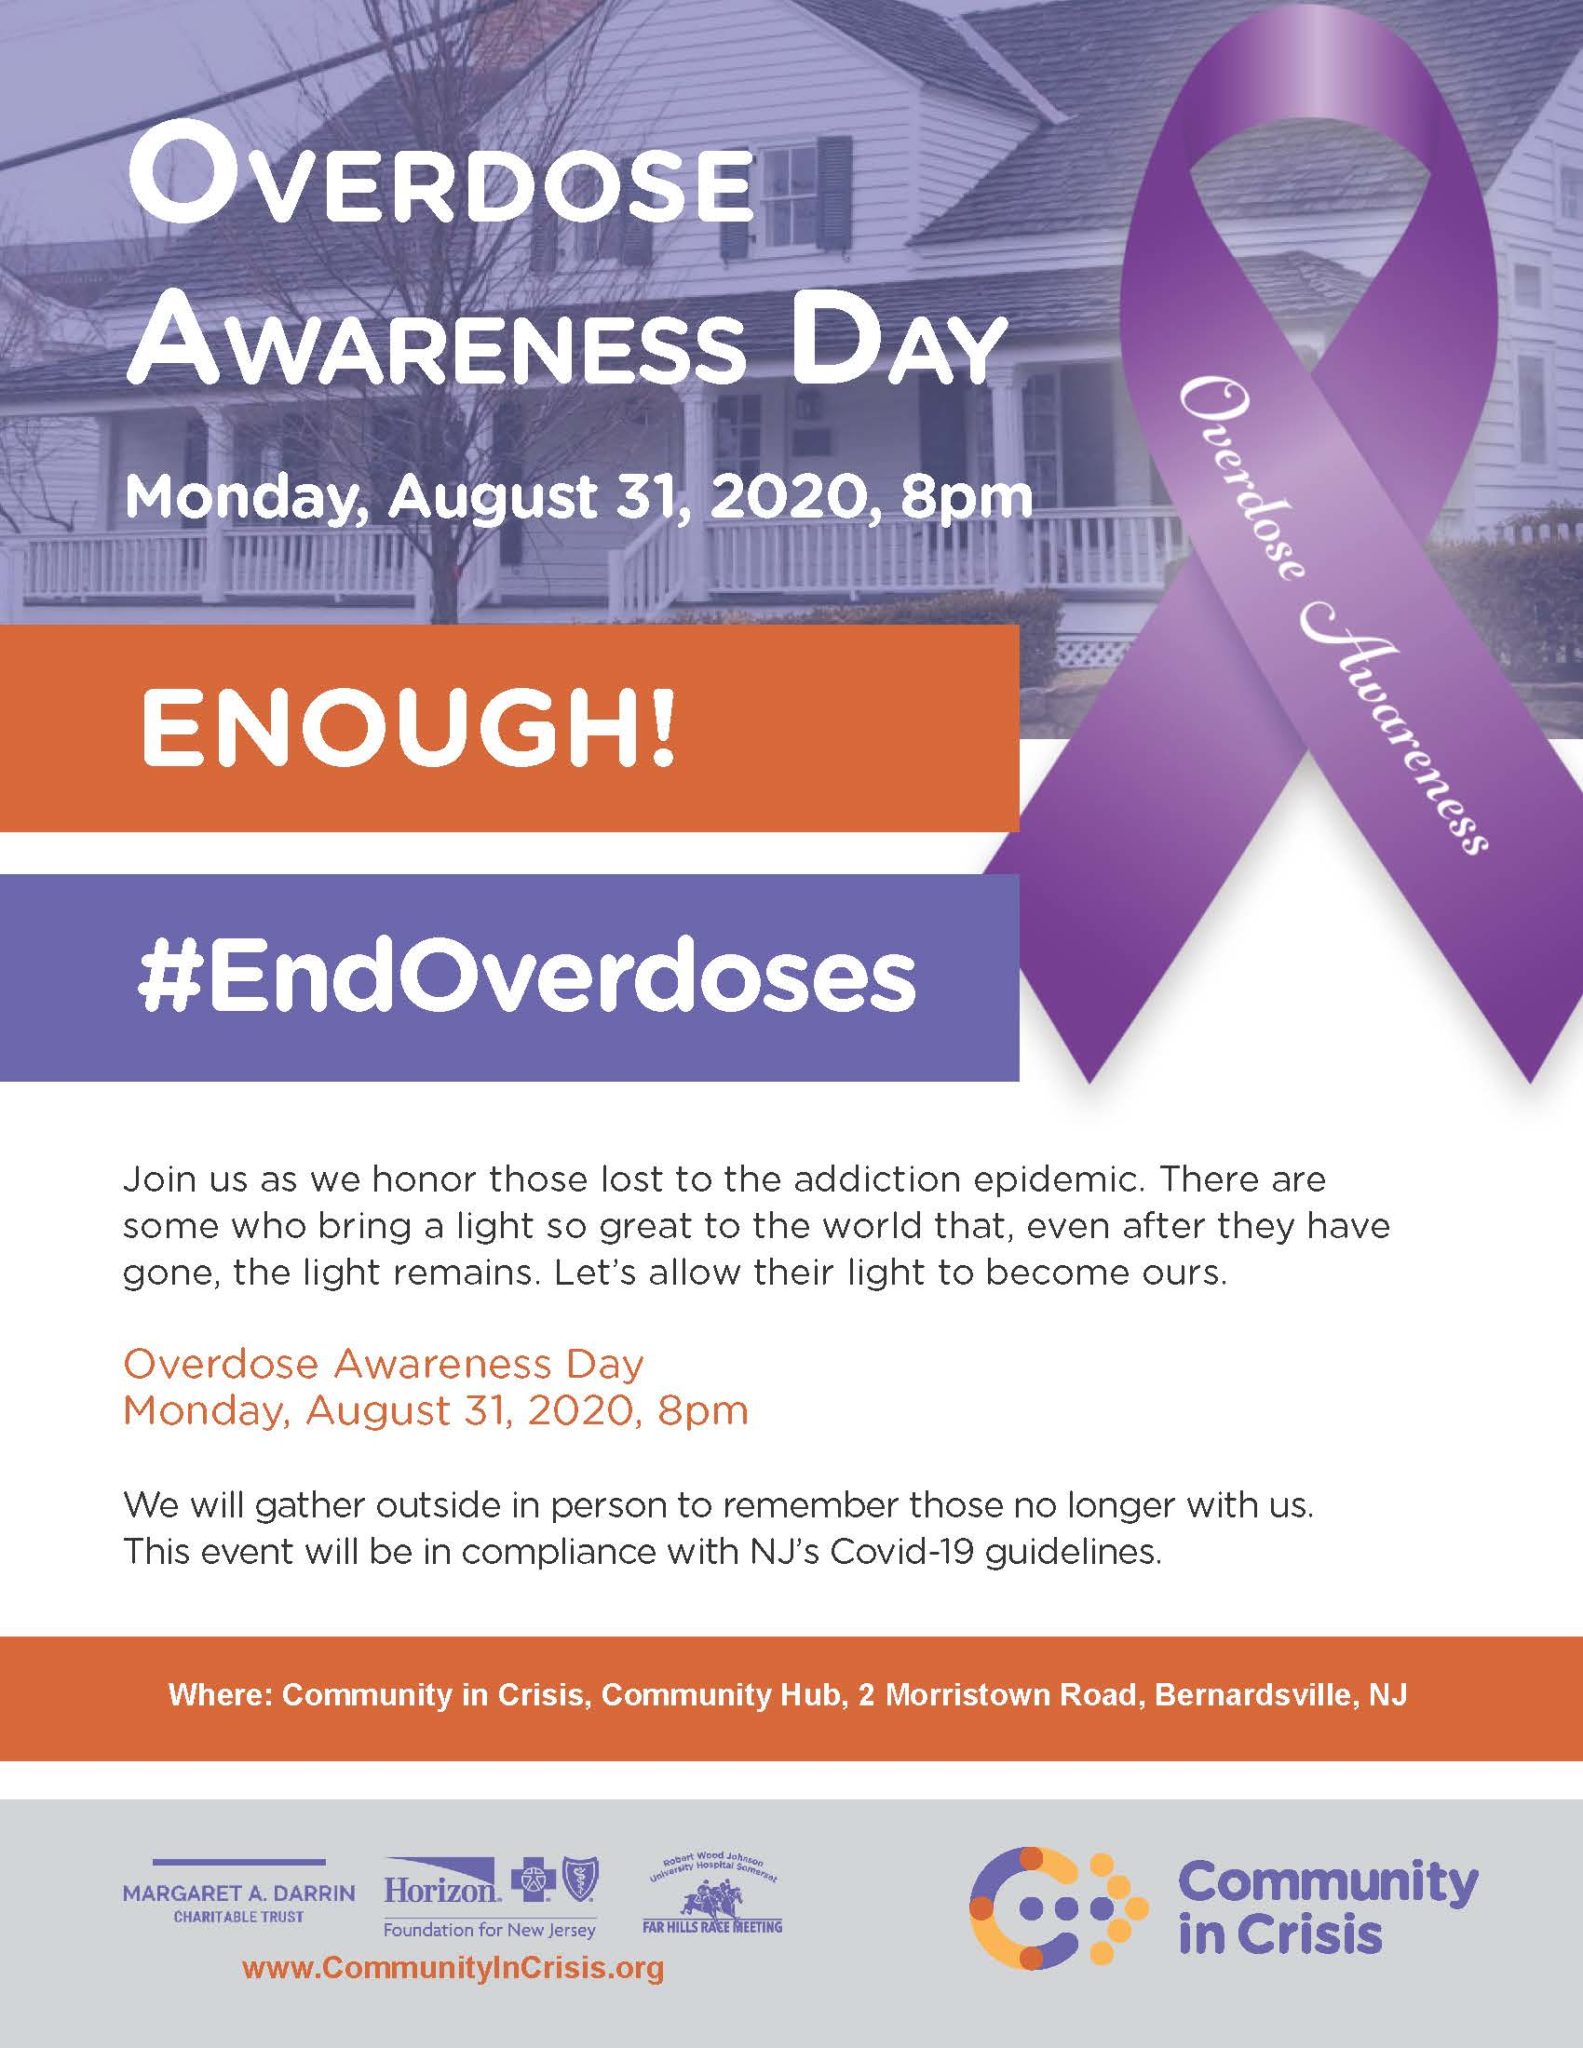 Overdose Awareness Day Community in Crisis